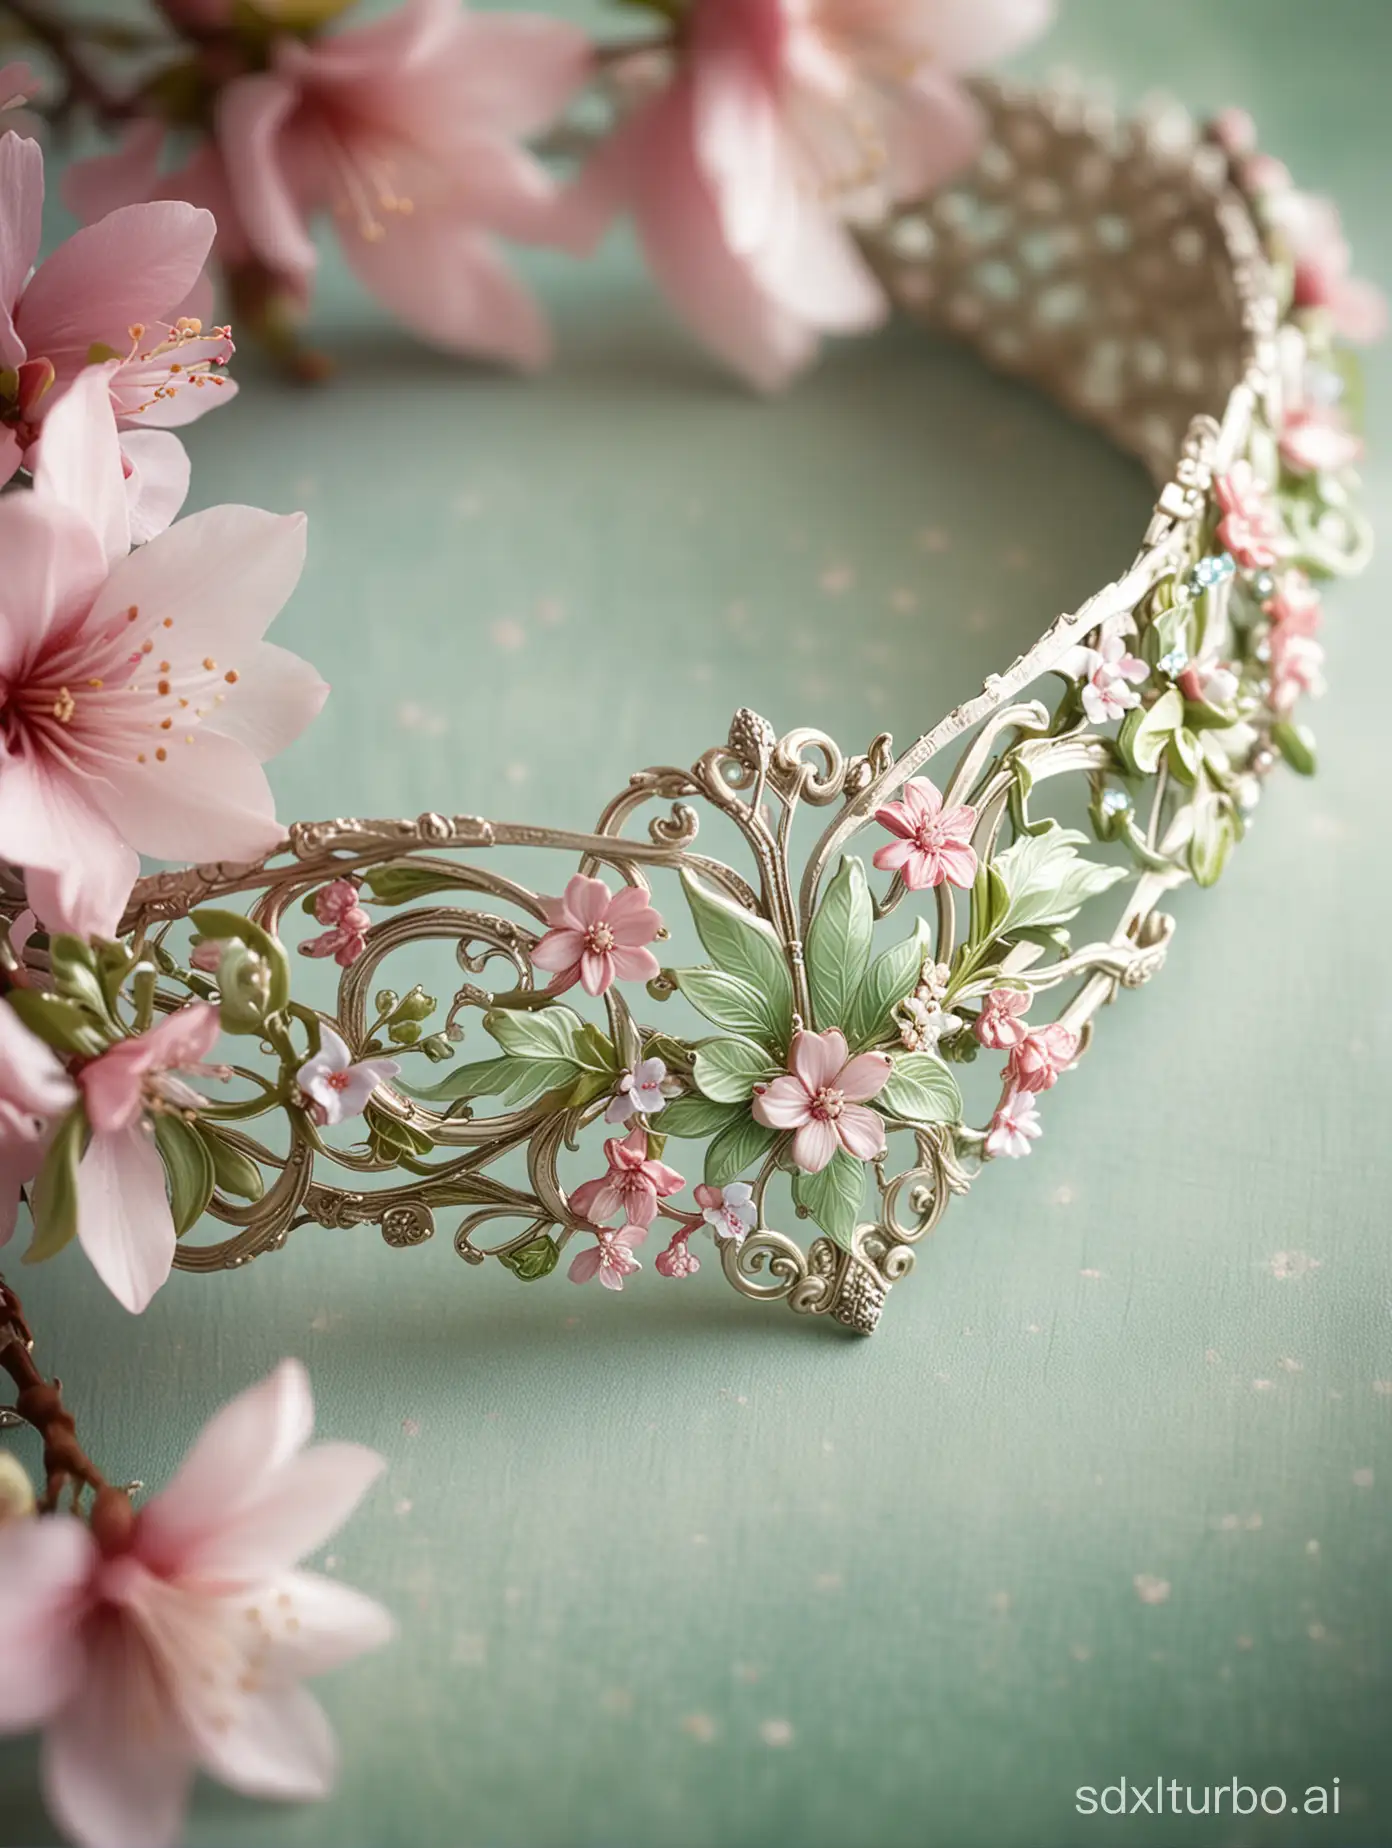 Art-Nouveau-Inspired-Elven-Choker-with-Cherry-Blossom-Design-in-Pastel-Colors